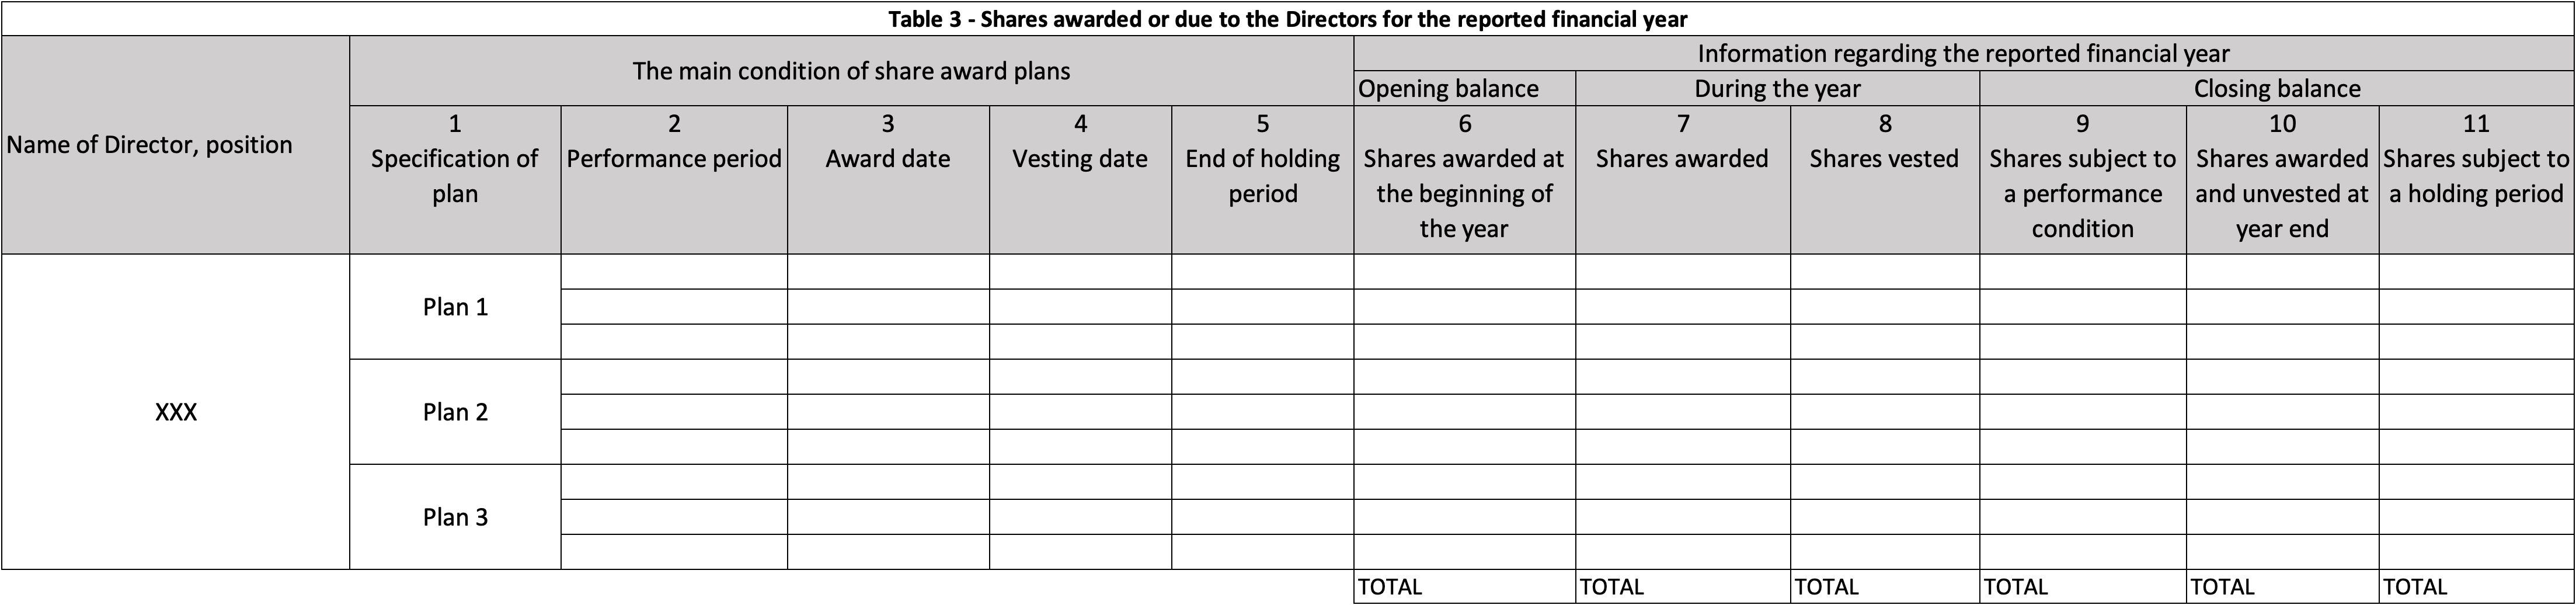 Table 3 - Shares awarded or due to the Directors for the reported financial year